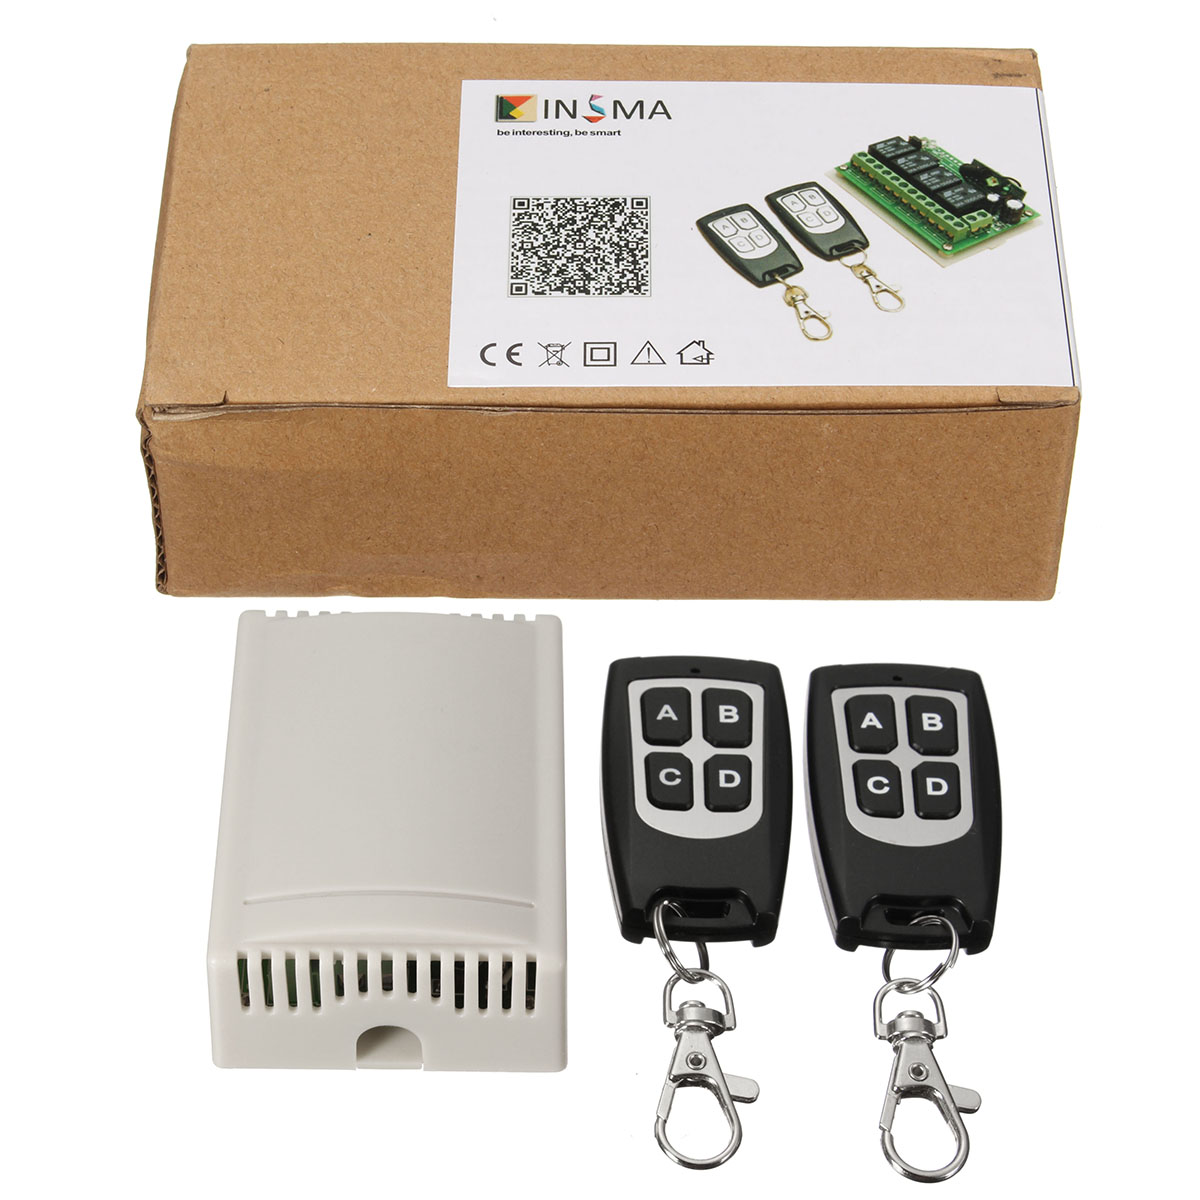 4CH-200M-Wireless-Remote-Control-Relay-Switch-Receiver--2-Transceiver-4-Channel-12V-DC-for-Smart-Hom-1641748